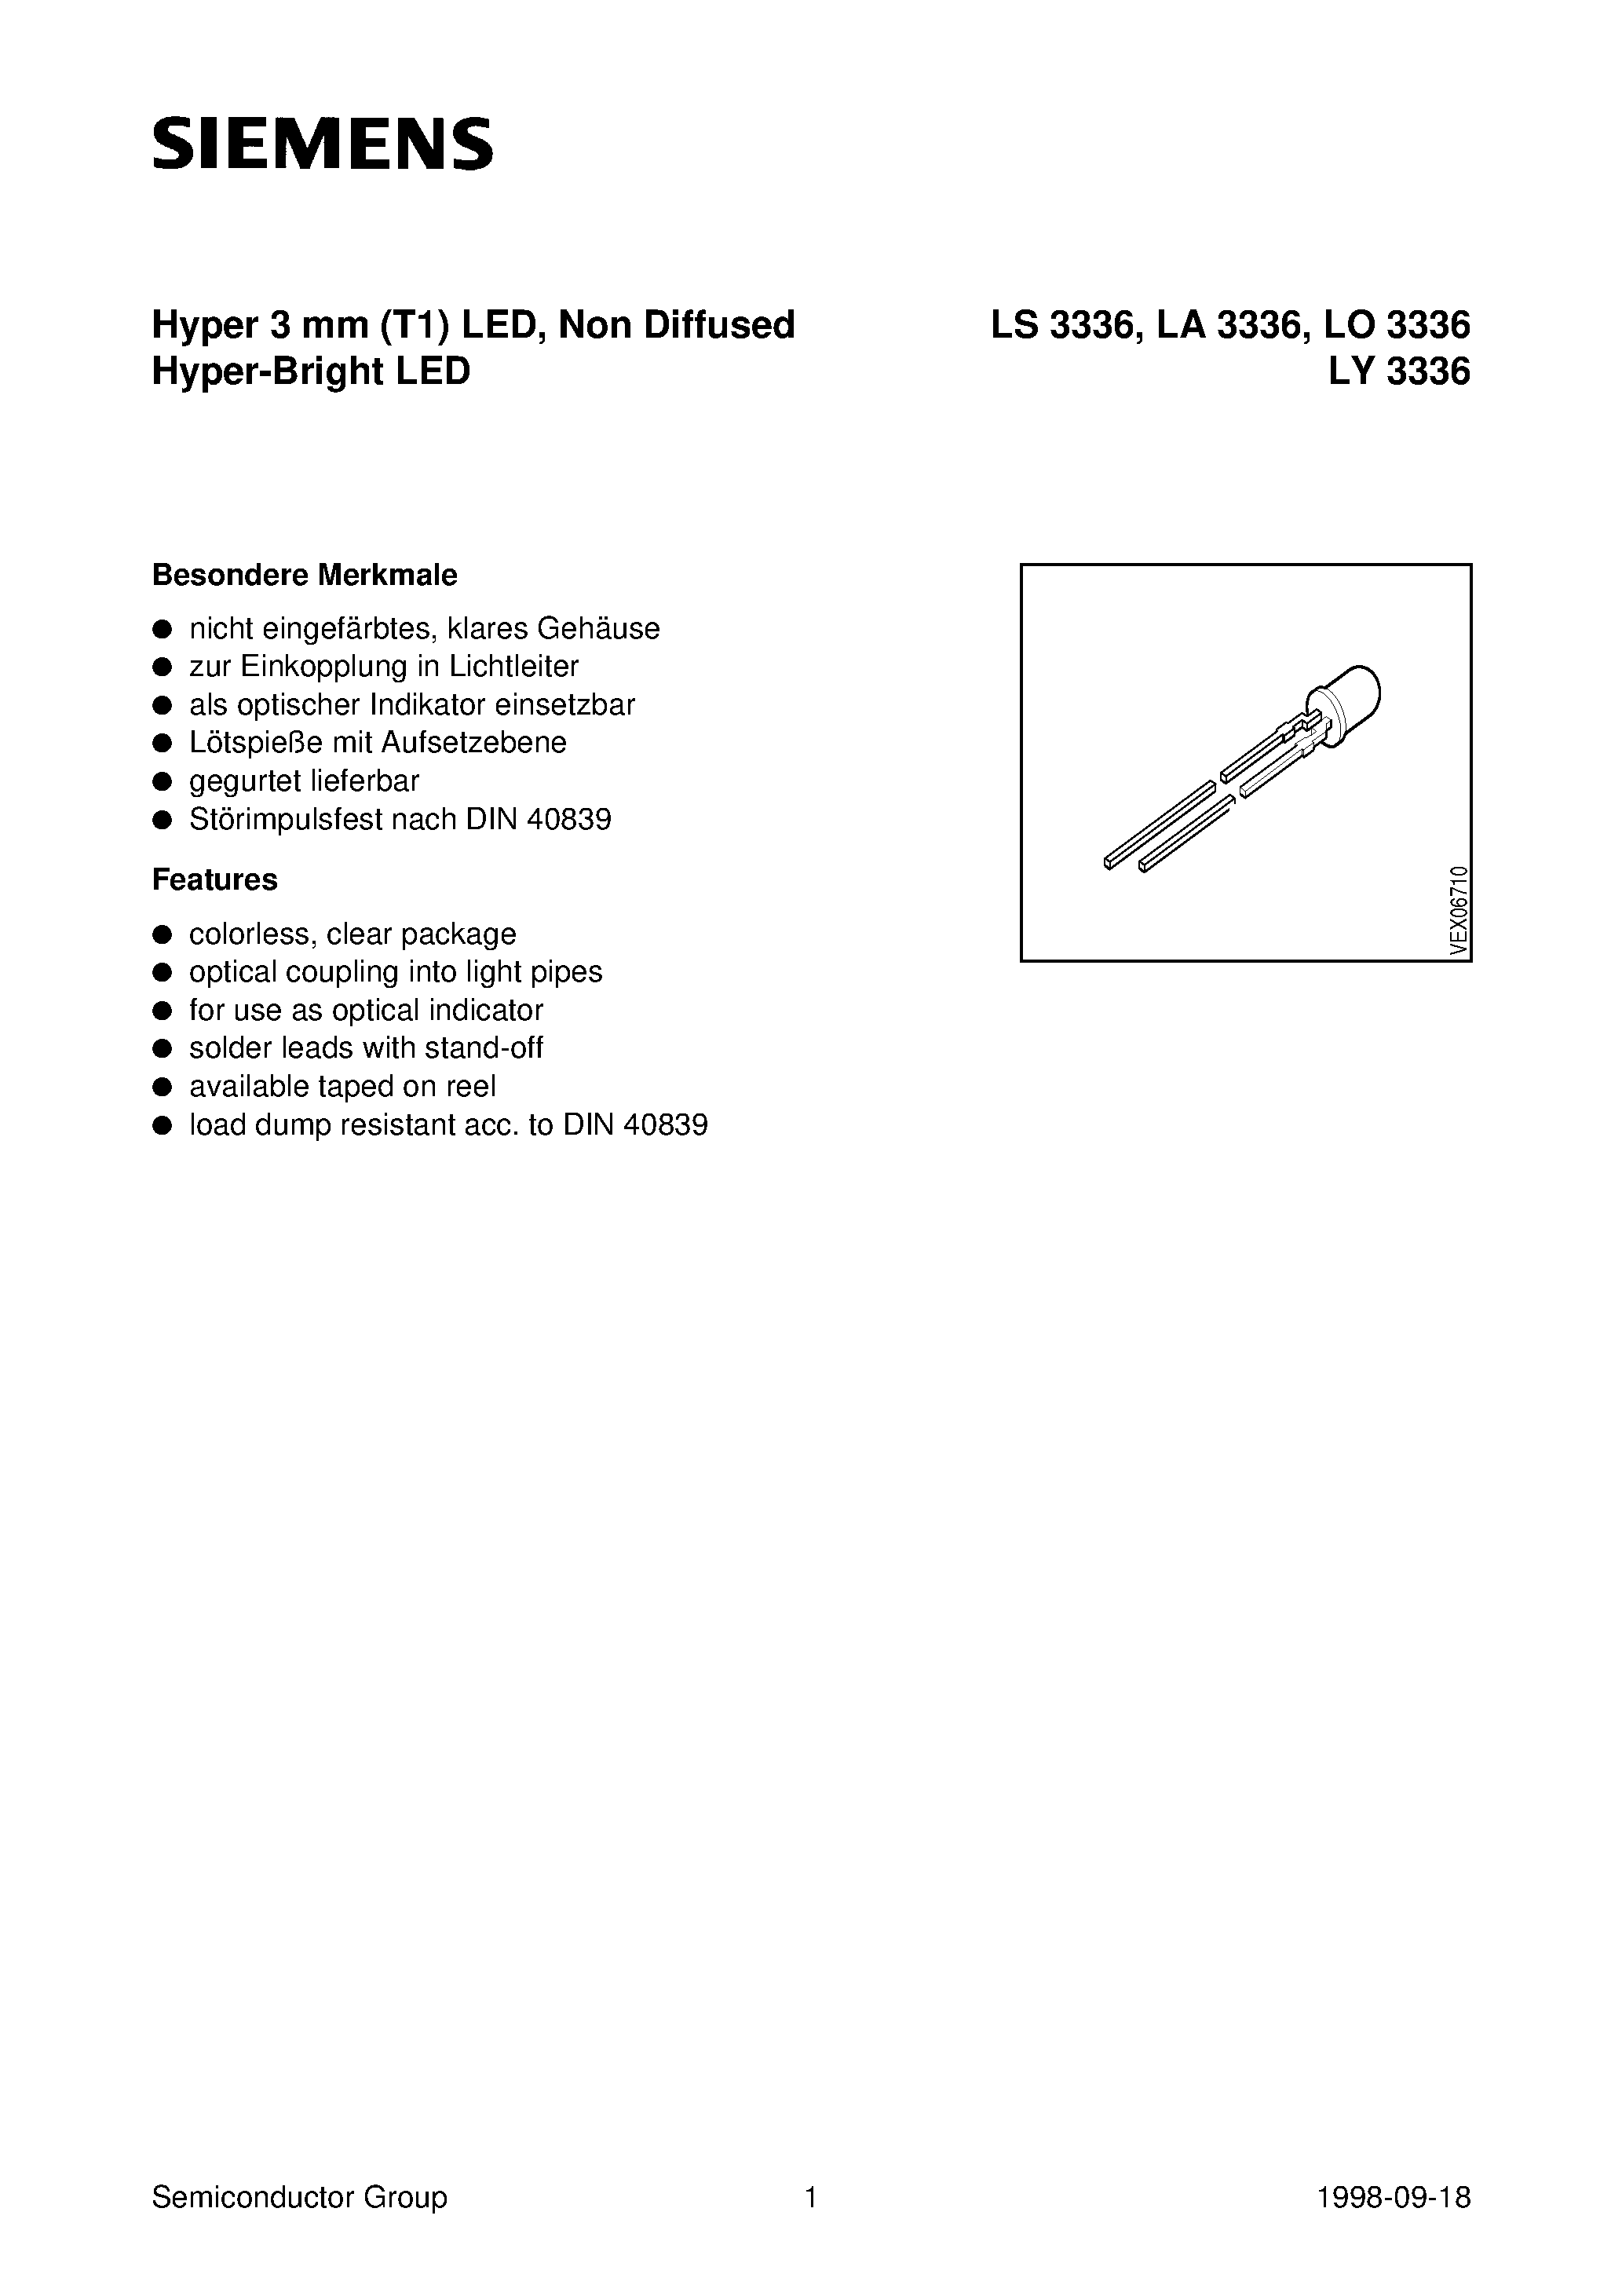 Datasheet LY3336-U - Hyper 3 mm T1 LED/ Non Diffused Hyper-Bright LED page 1